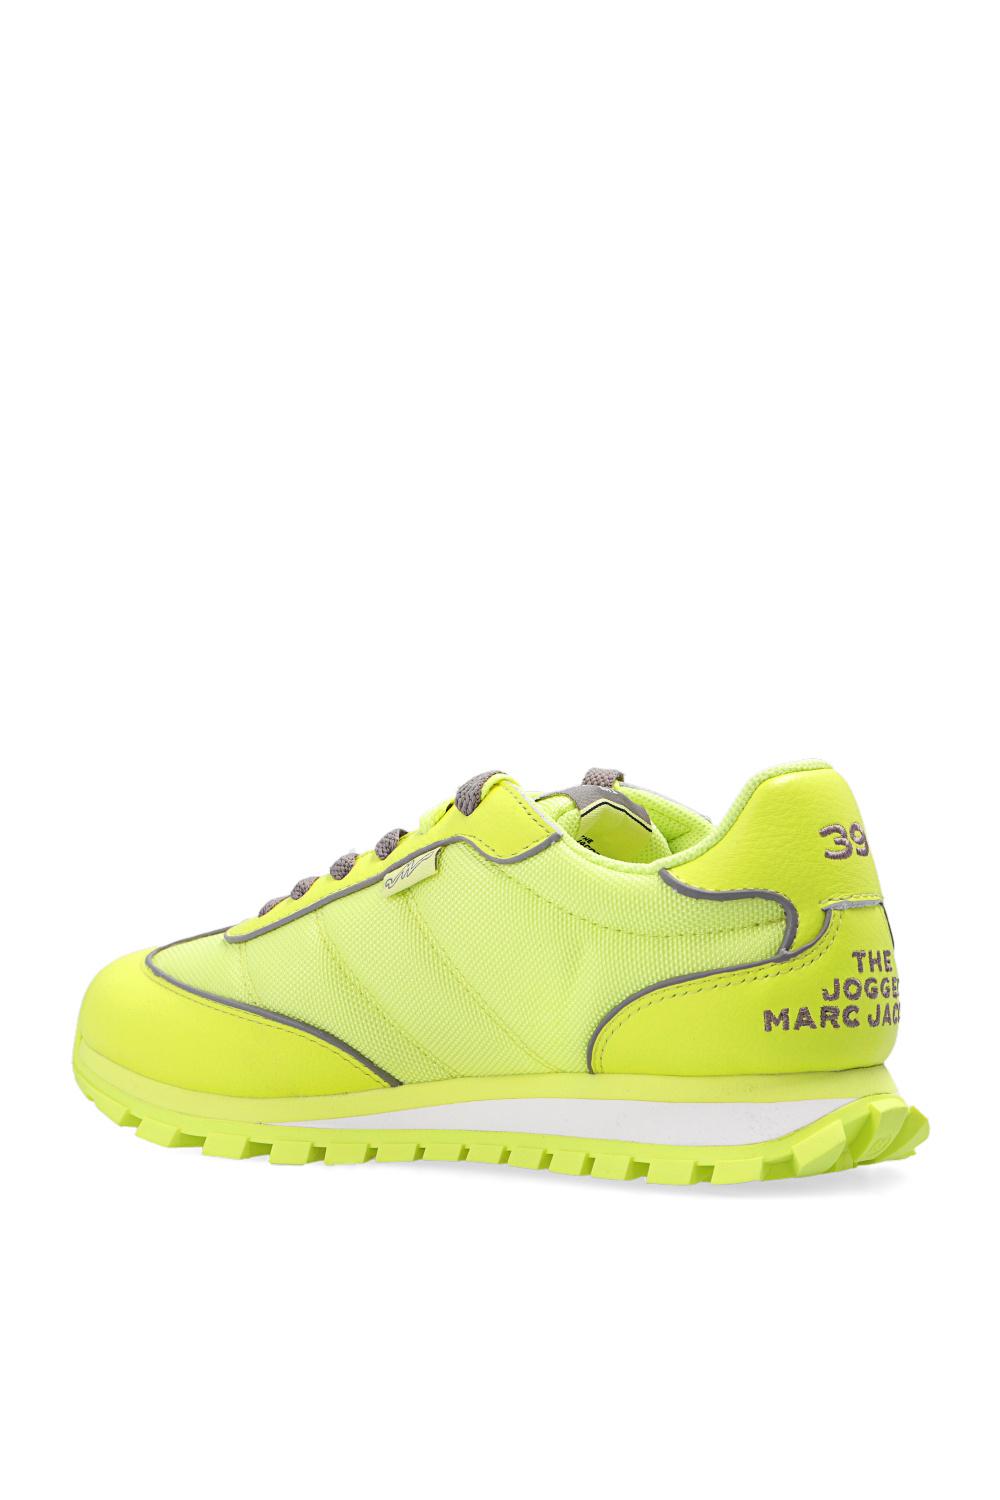 Marc Jacobs 'Jogger Fluoro' Sneakers in Neon (Yellow) | Lyst